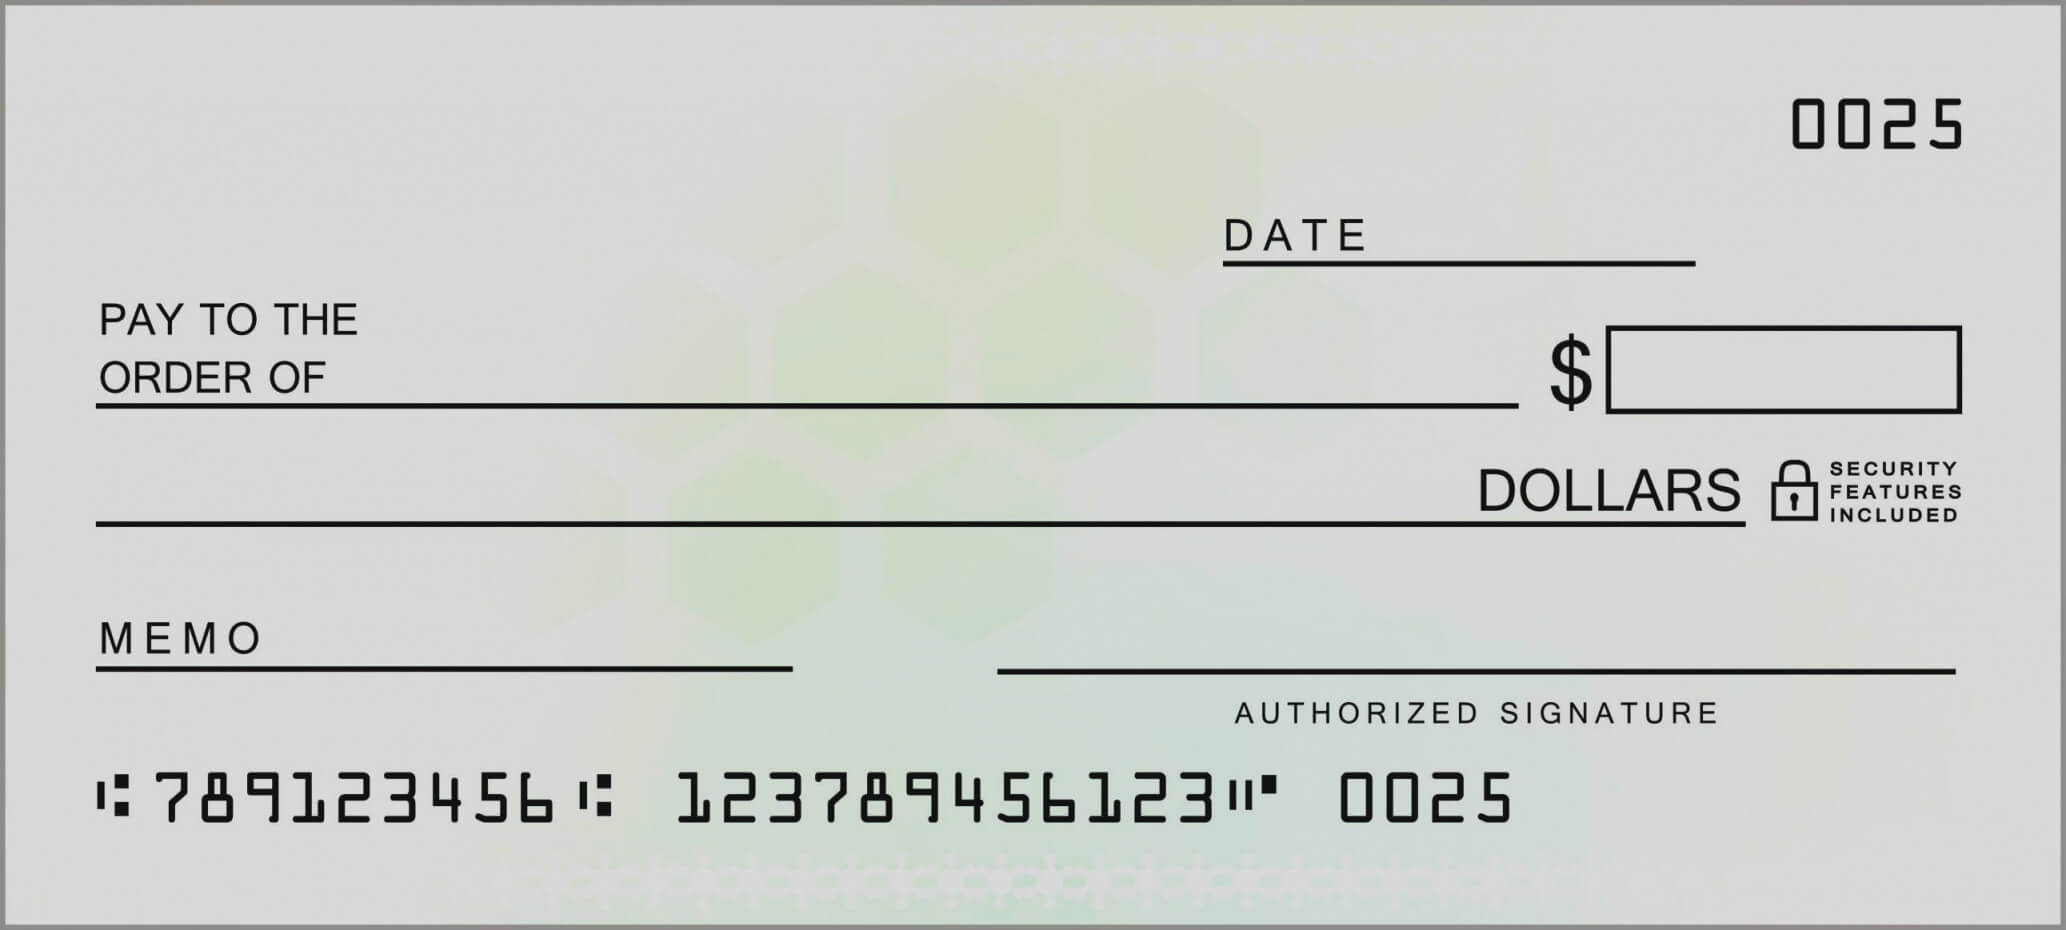 021 Fake Blank Check Template Cheque Free Awesome Payroll For Blank Business Check Template Word